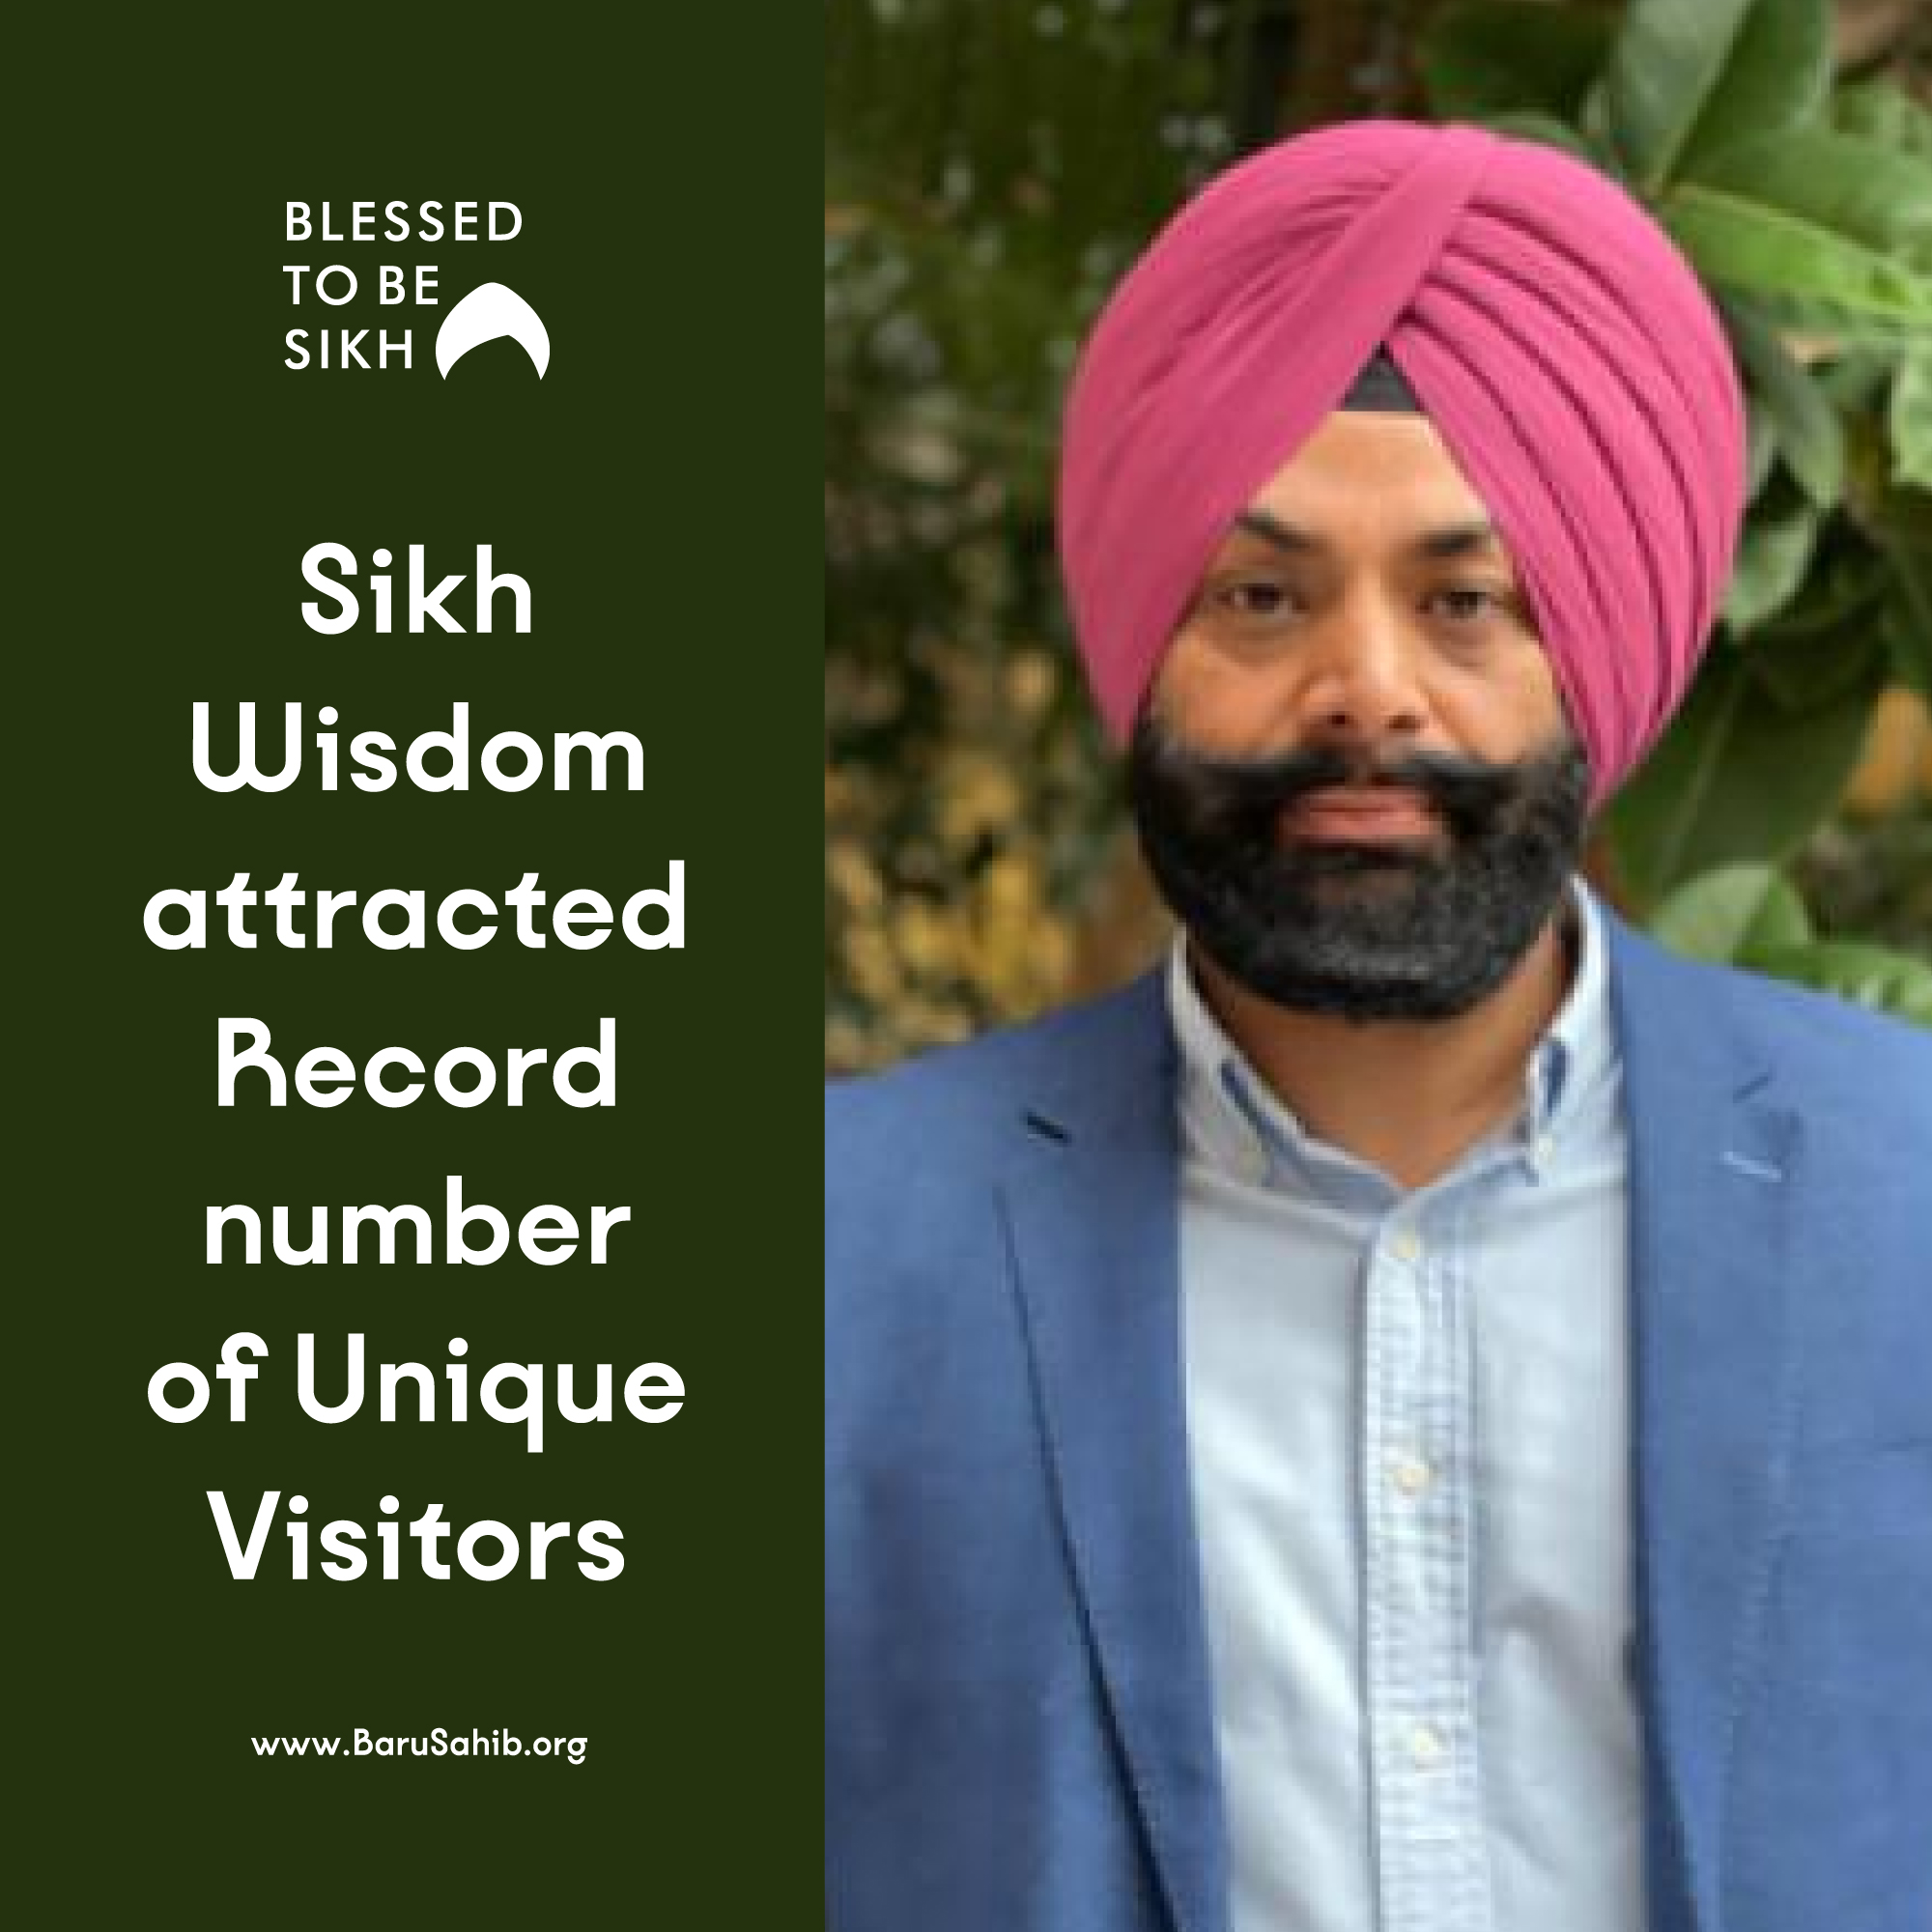 Sikh Wisdom attracted Record number of Unique Visitors